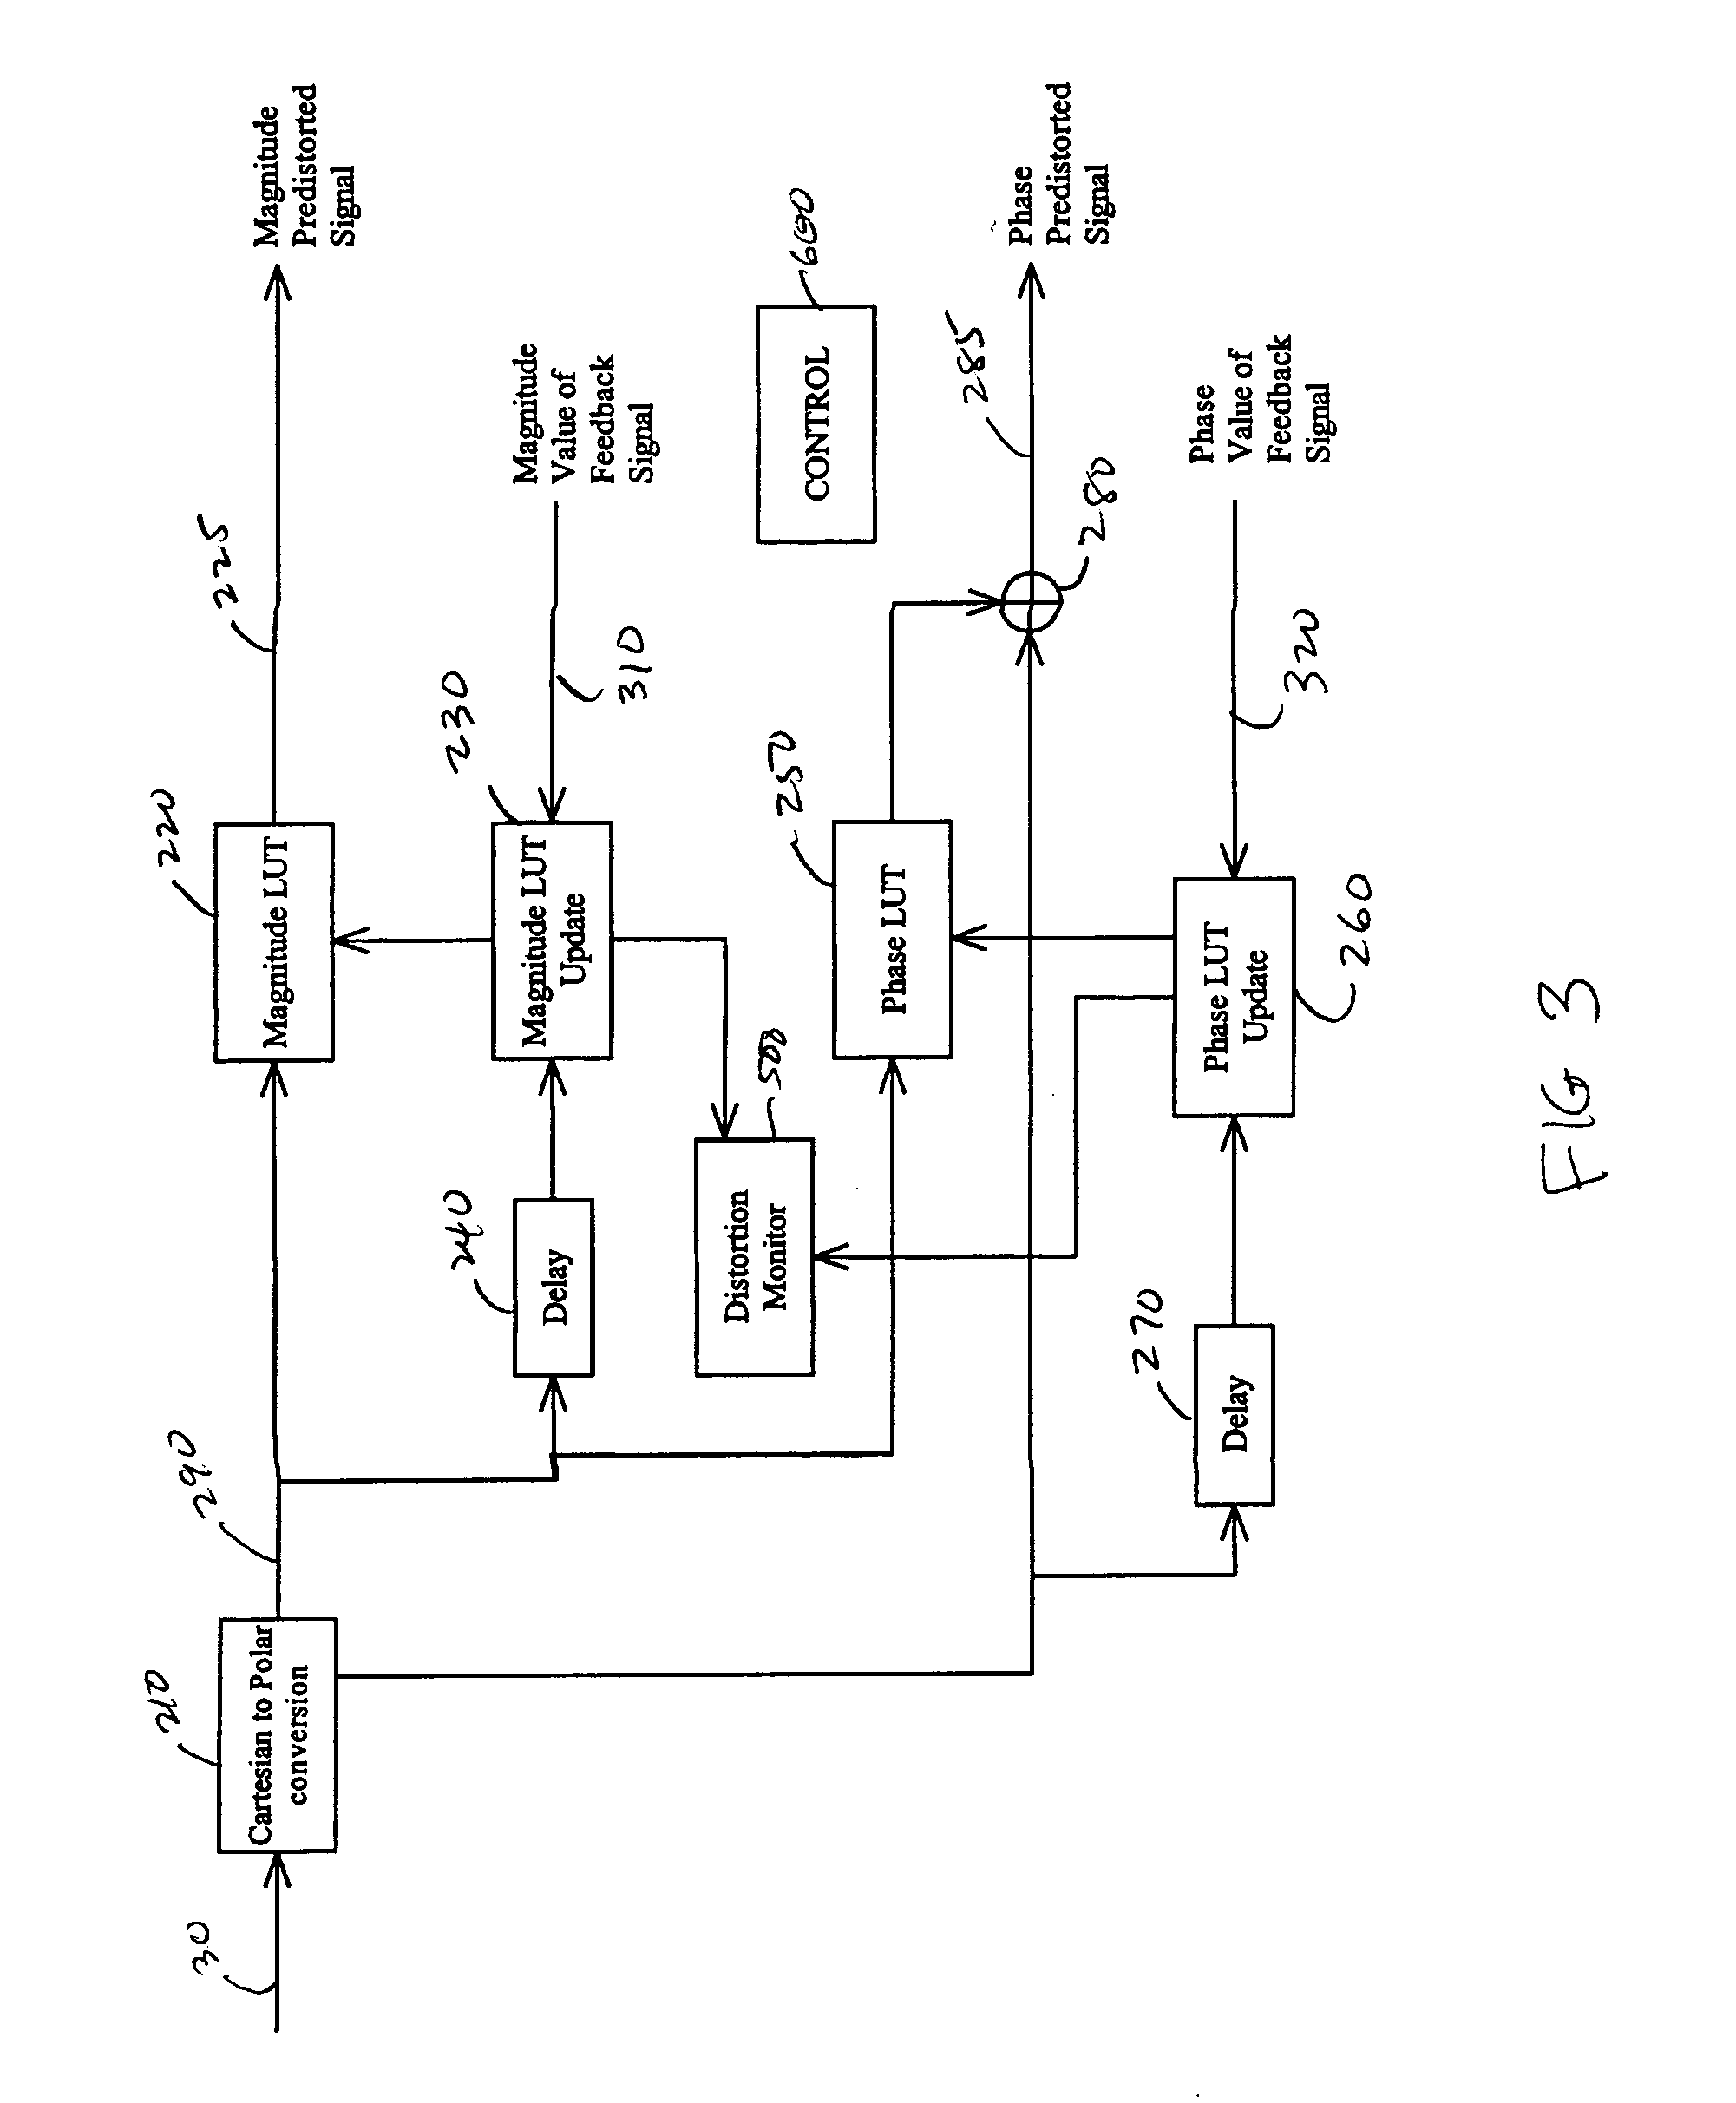 Adaptive predistortion for transmit system with gain, phase and delay adjustments